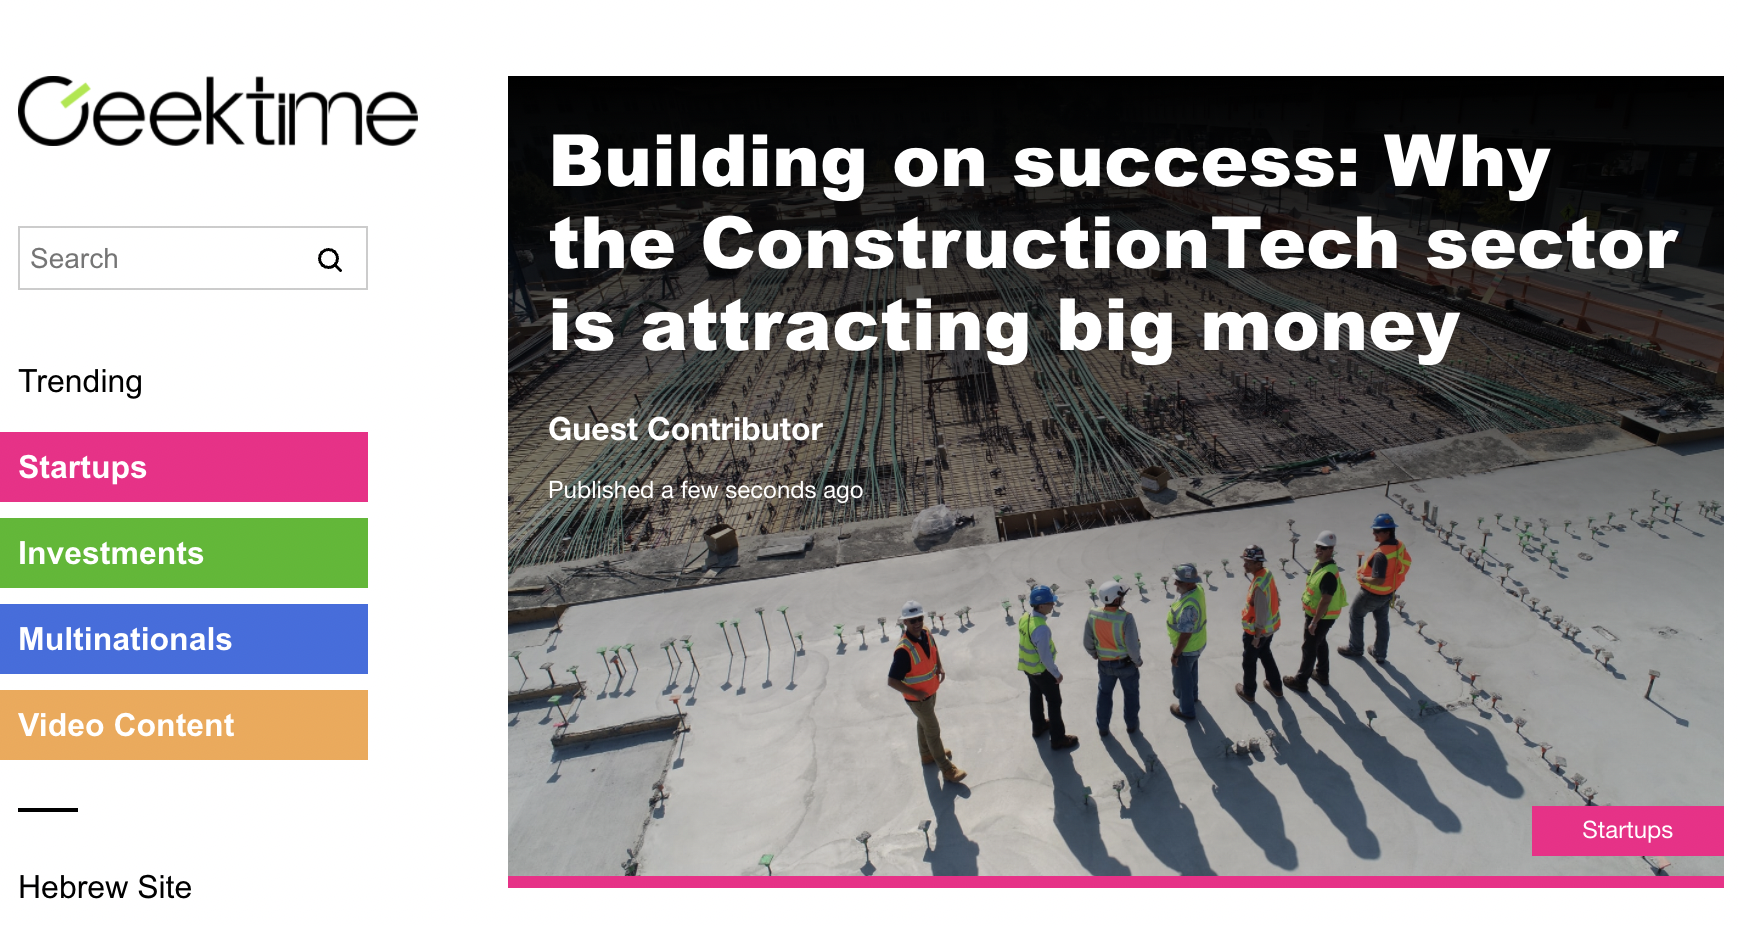 Building on success: Why the ConstructionTech sector is attracting big money